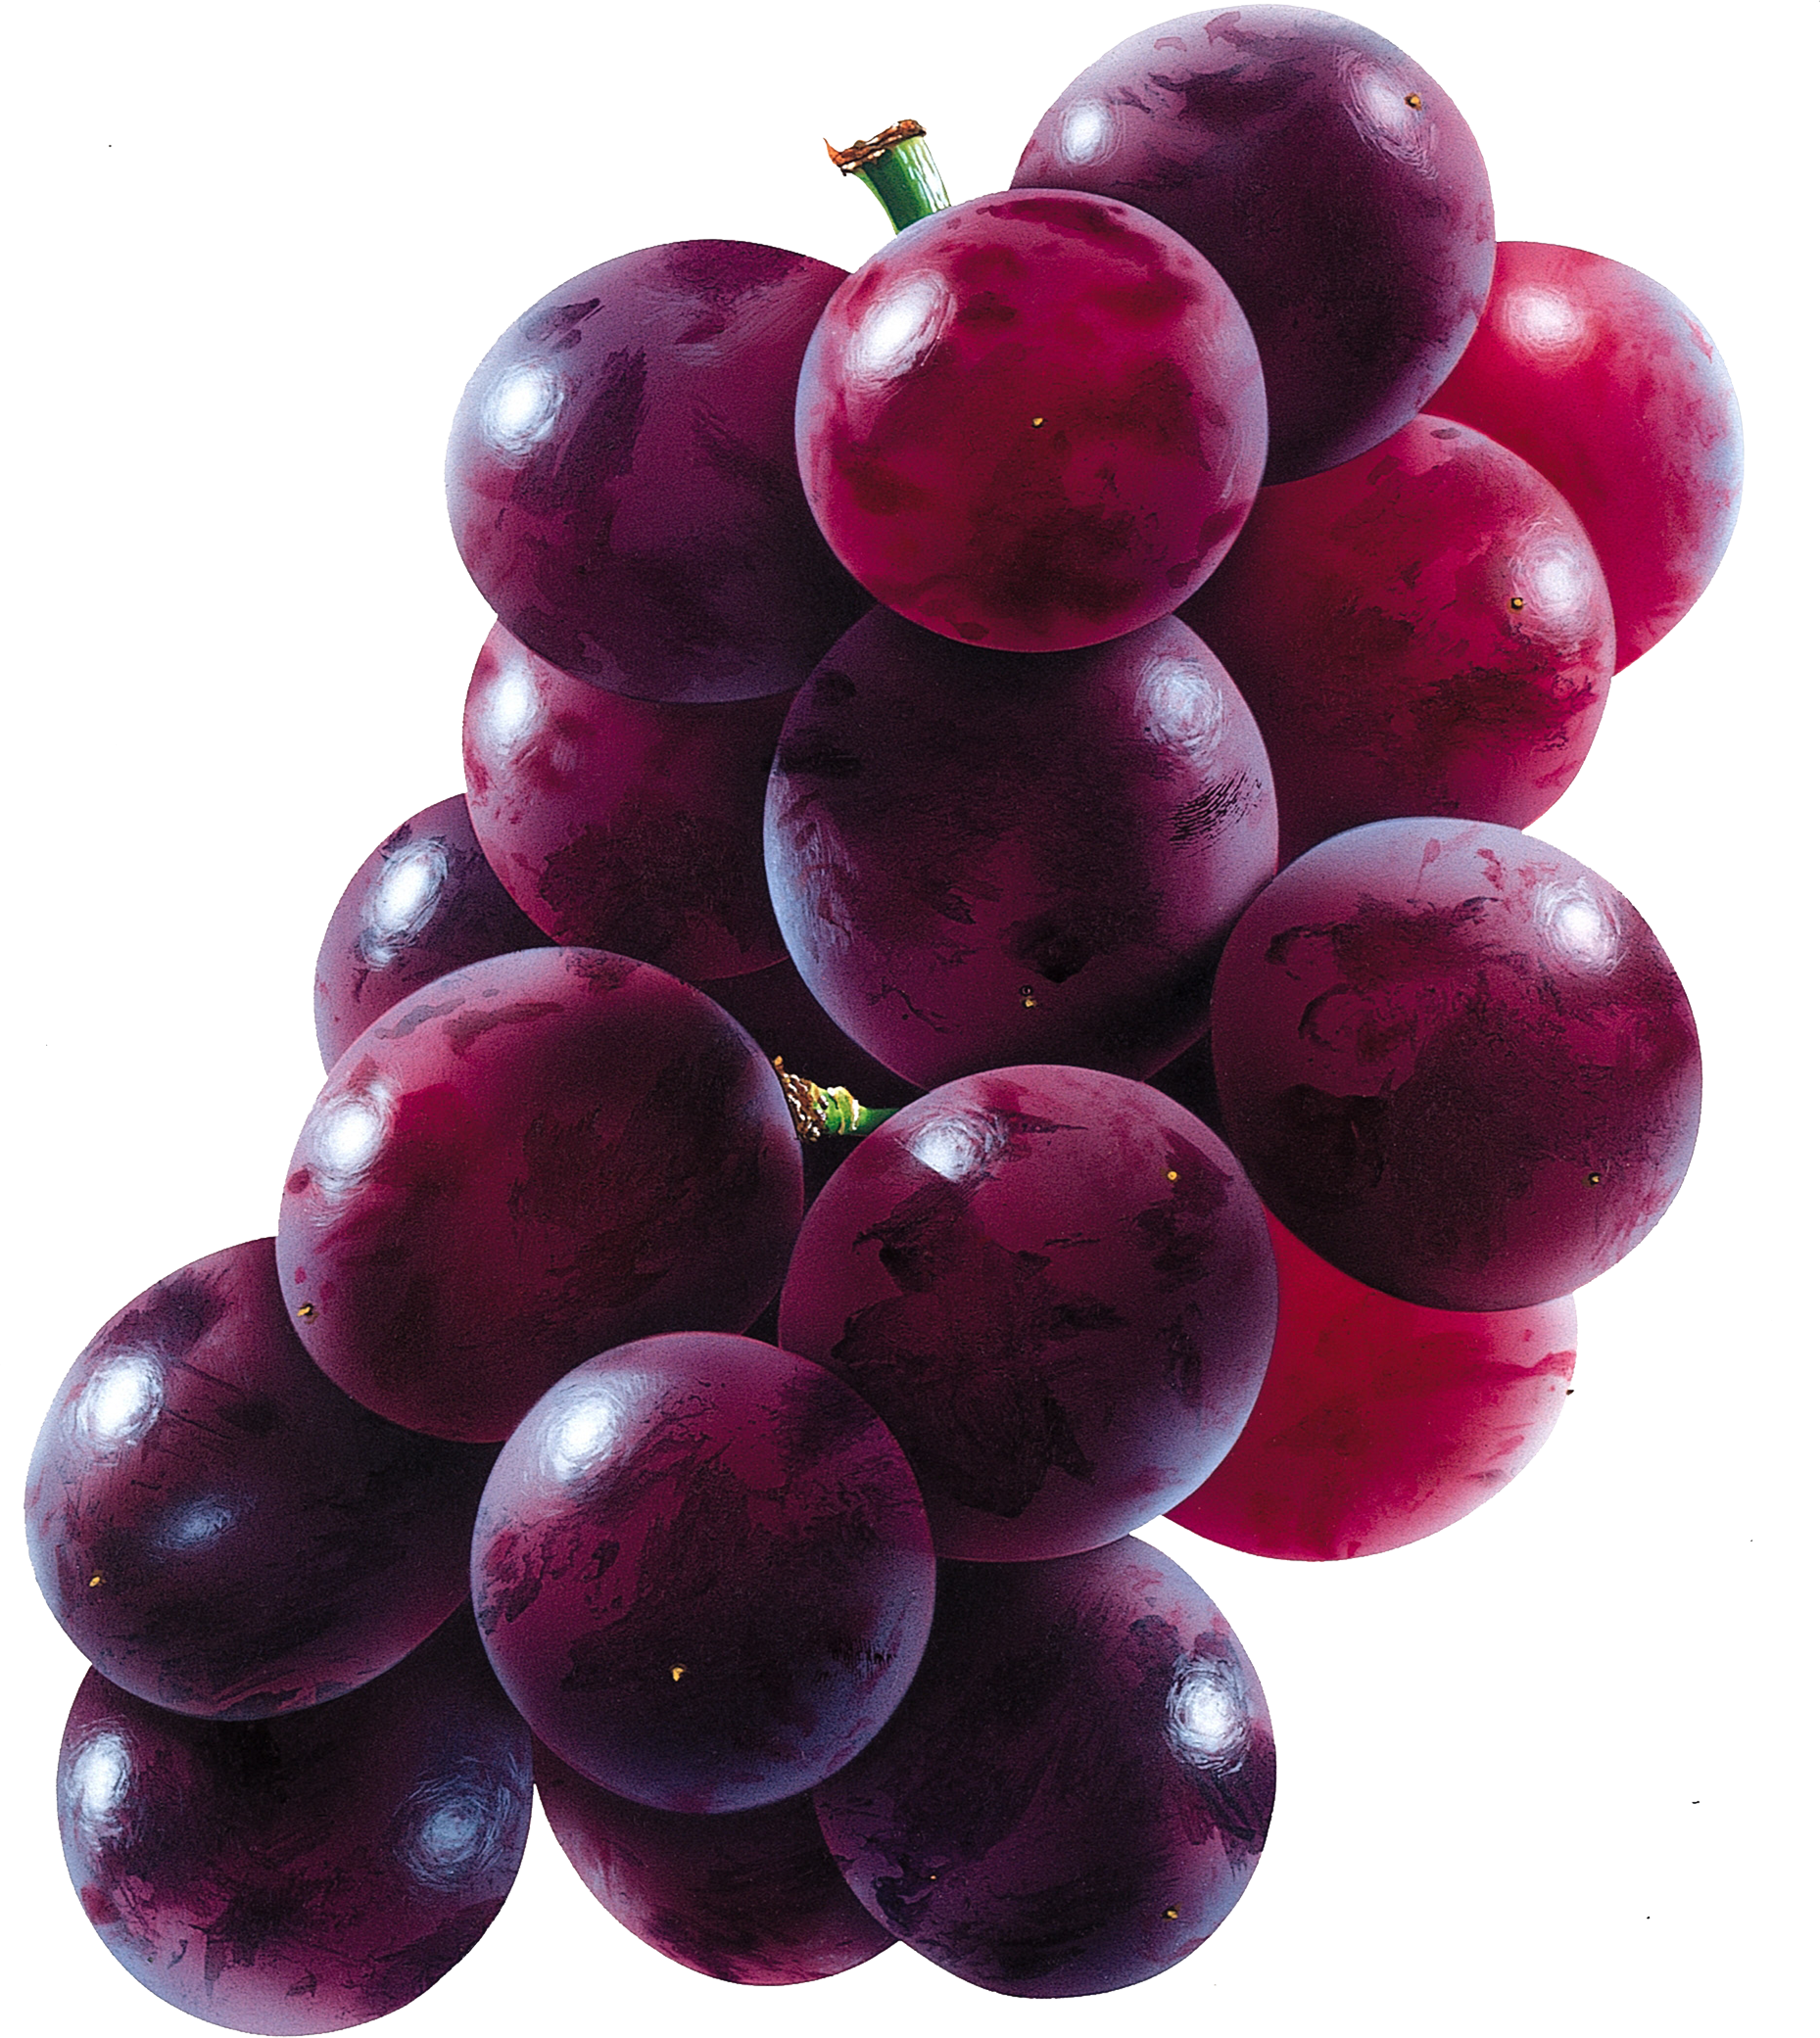 Red Grape Png Image - Grape, Transparent background PNG HD thumbnail